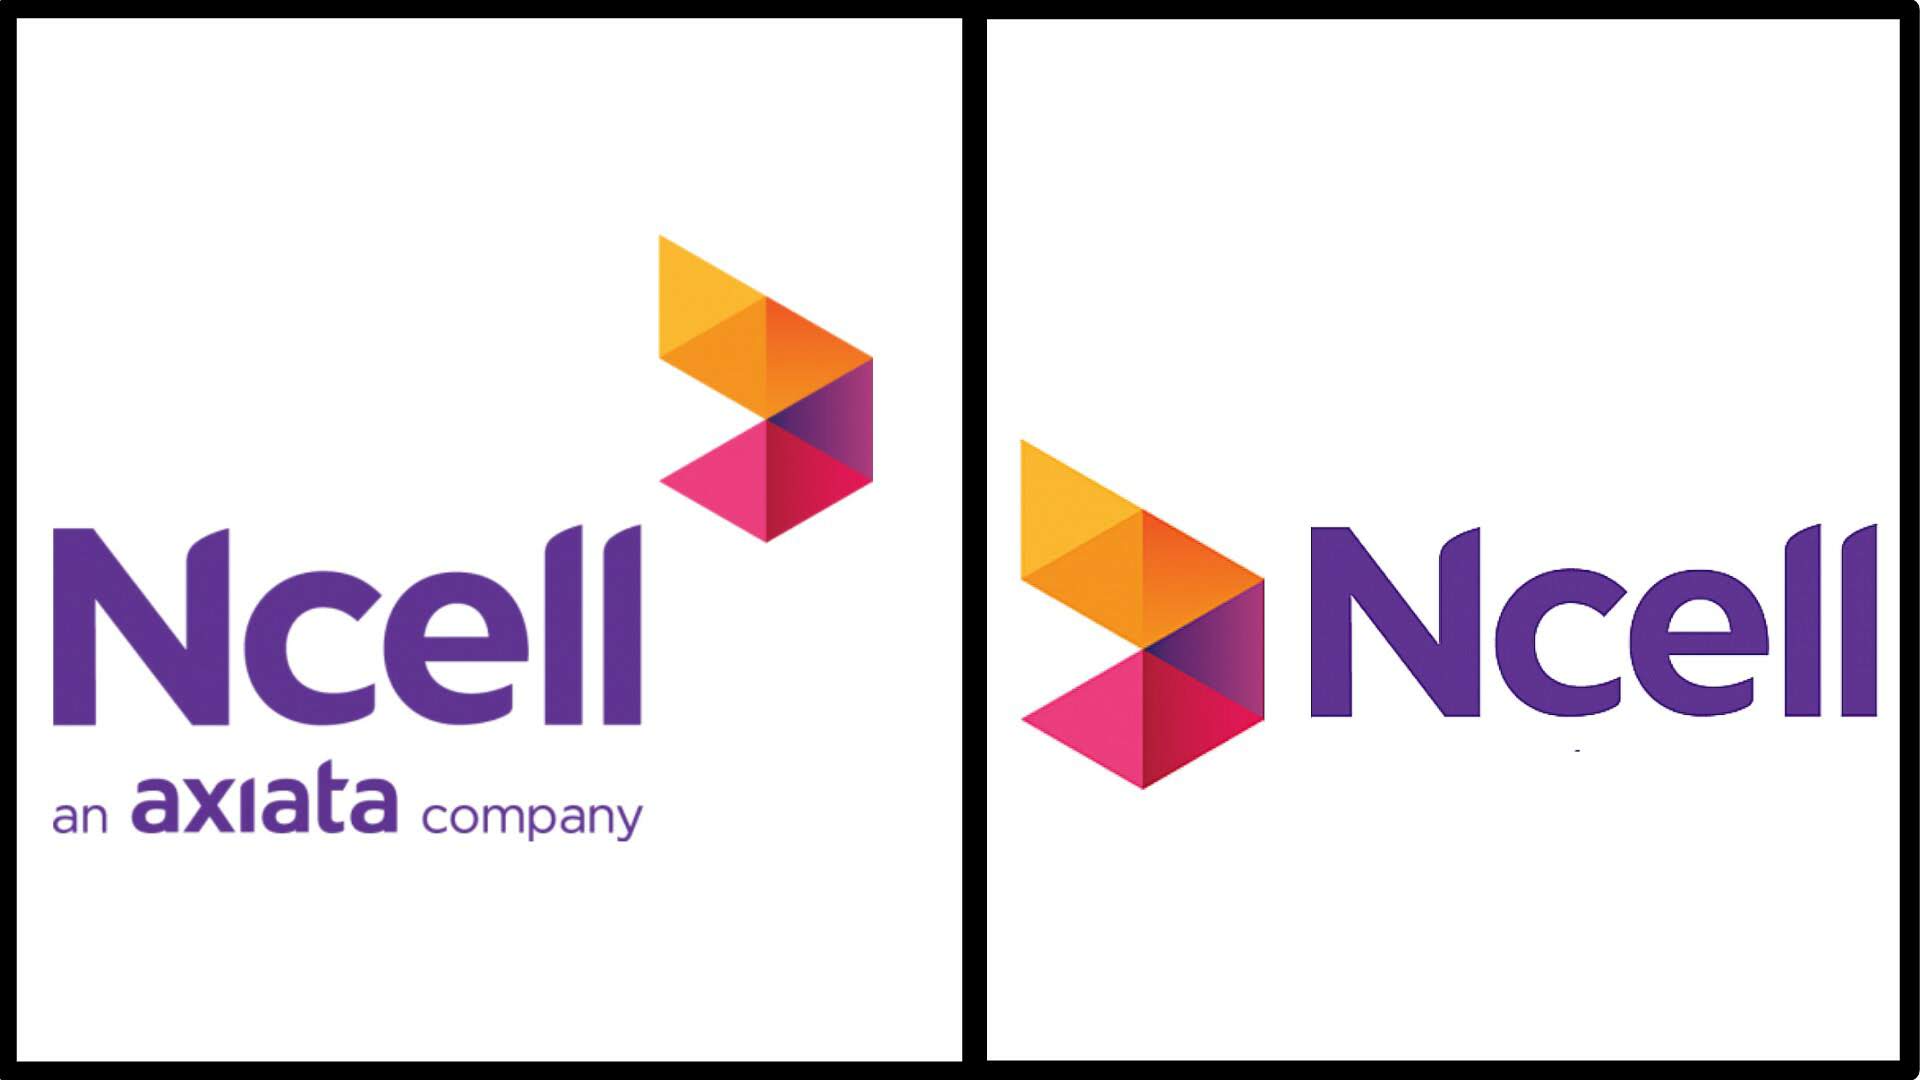 Ncell makes yet another rebranding,“Today. Tomorrow. Together.”